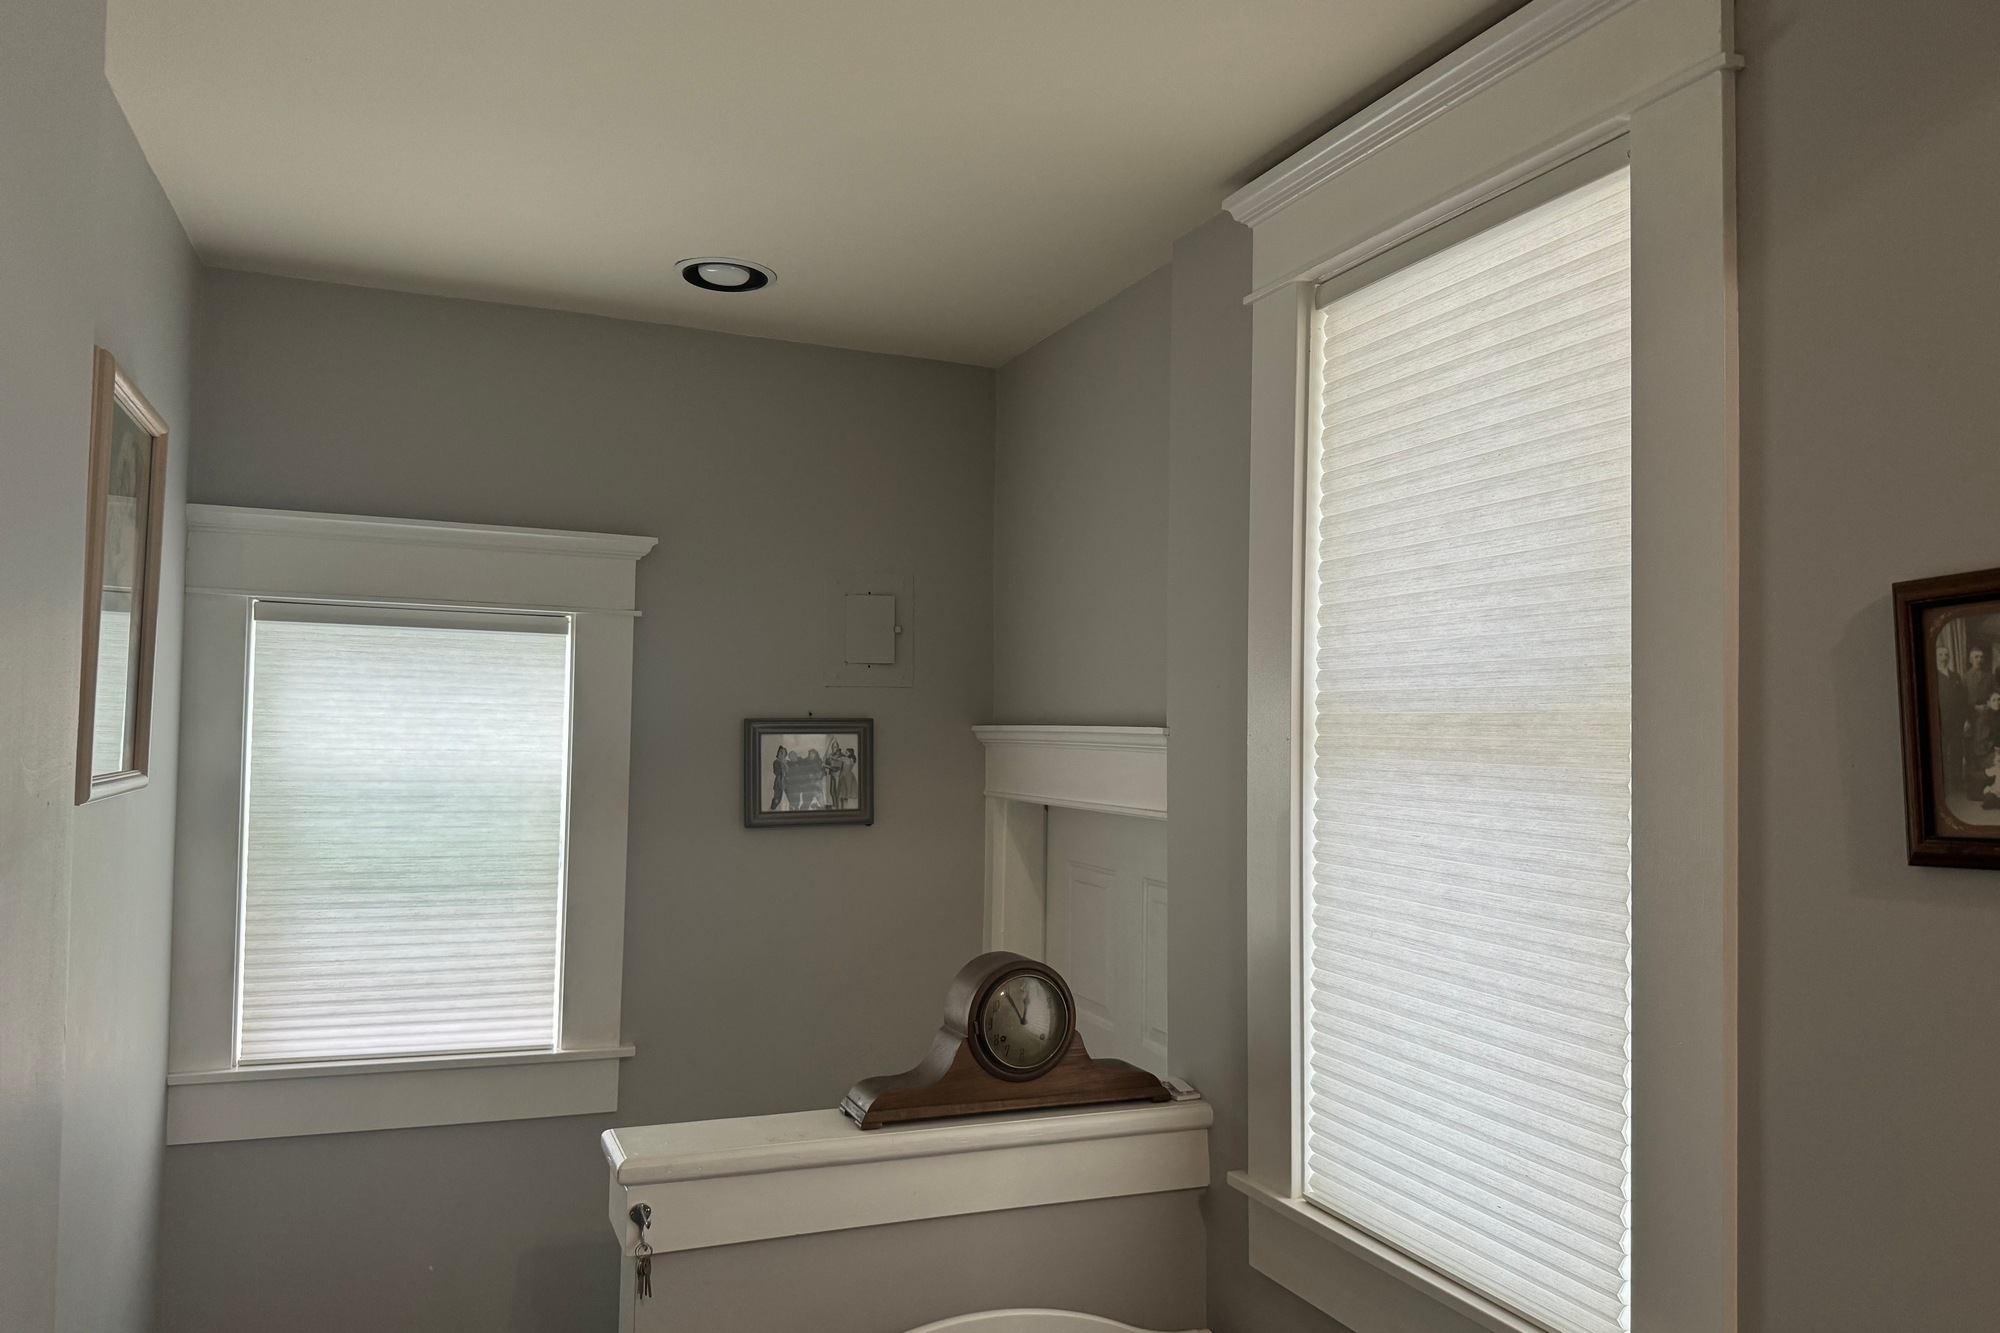 Hunter Douglas Duette shade with PowerView Gen 3 automation -- Best custom-installed cellular smart shades